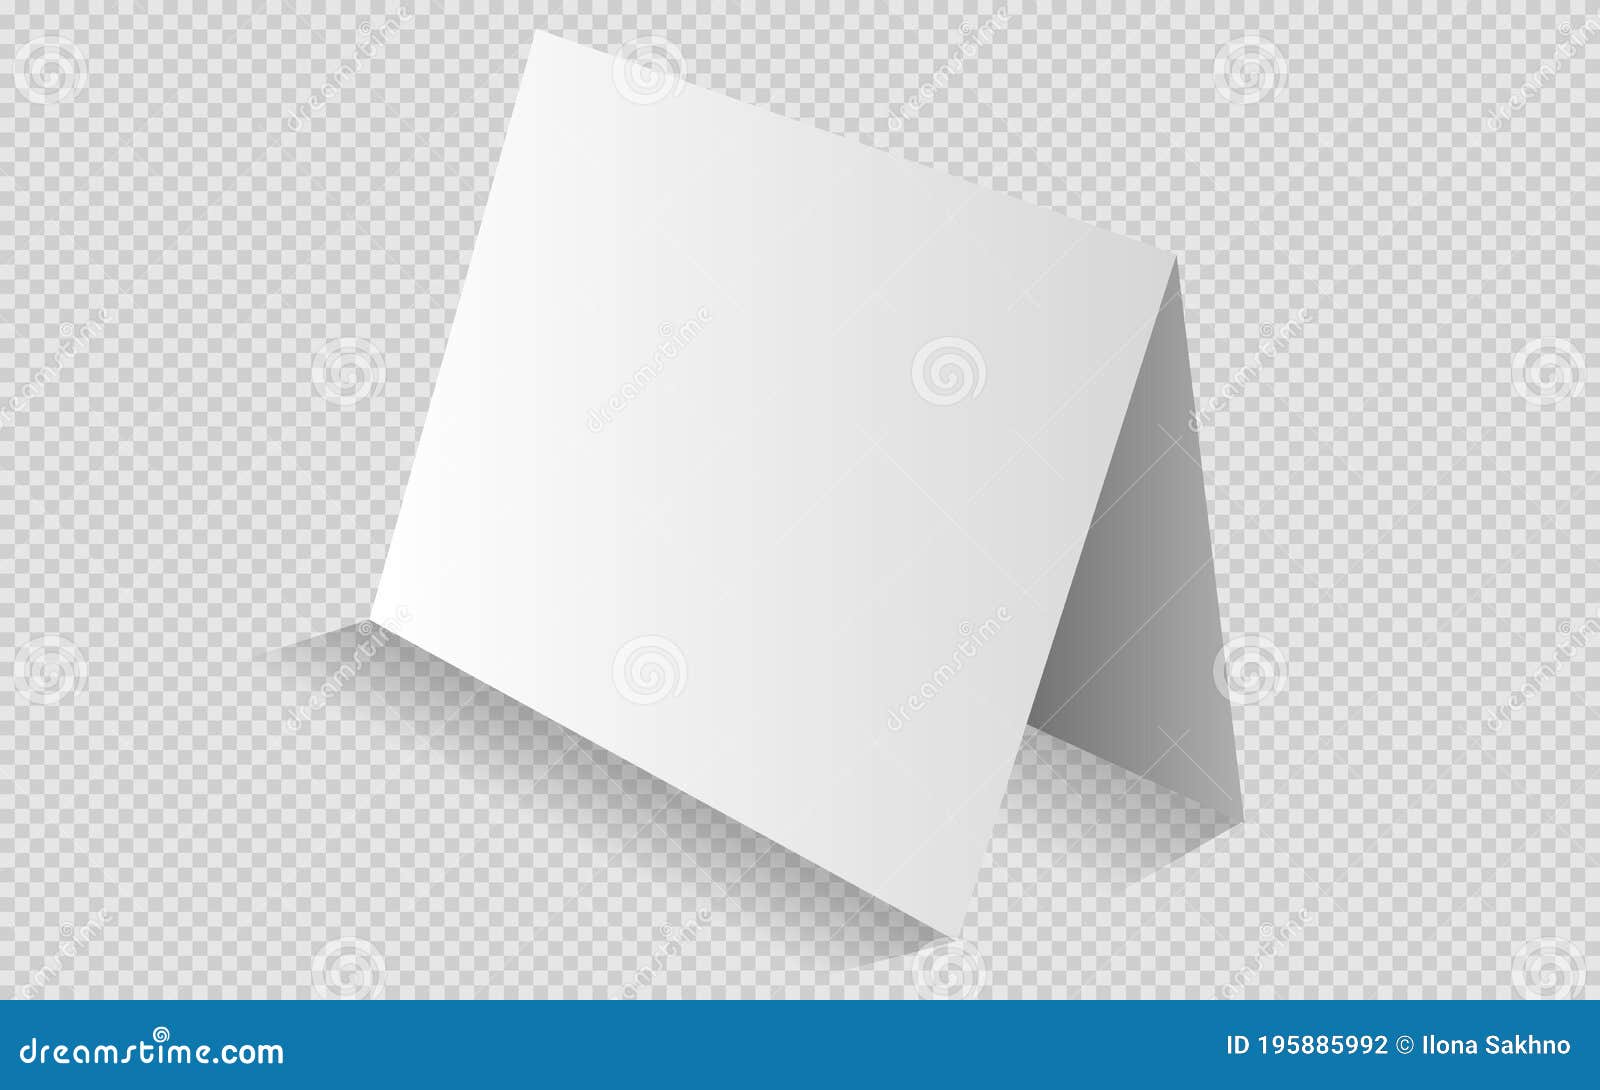 Tent Branding Card Template. White, Clear, Blank, Isolated Tent With Blank Tent Card Template